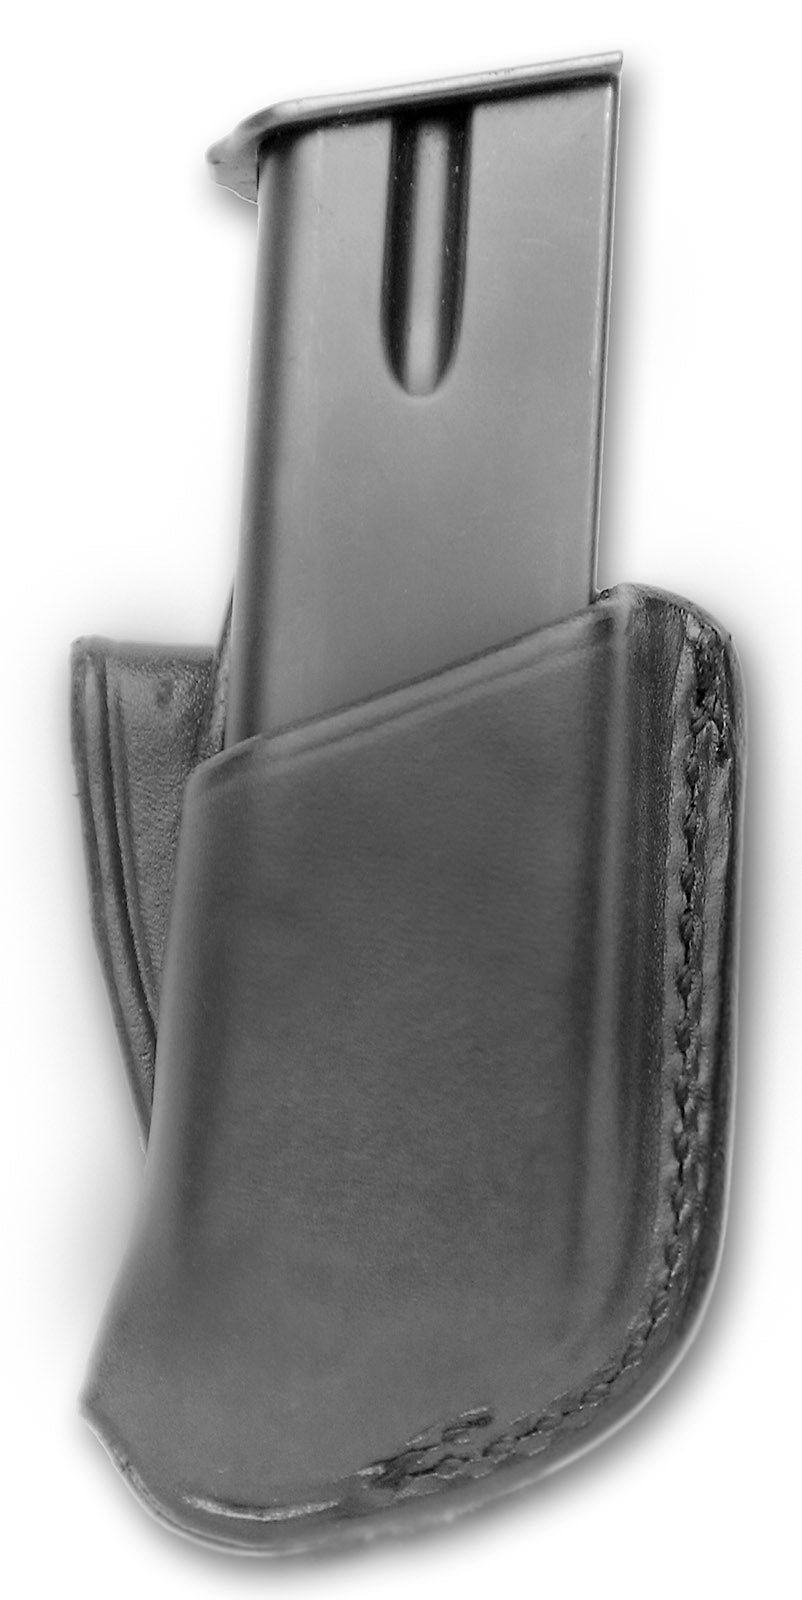 Snap-On Magazine Carrier